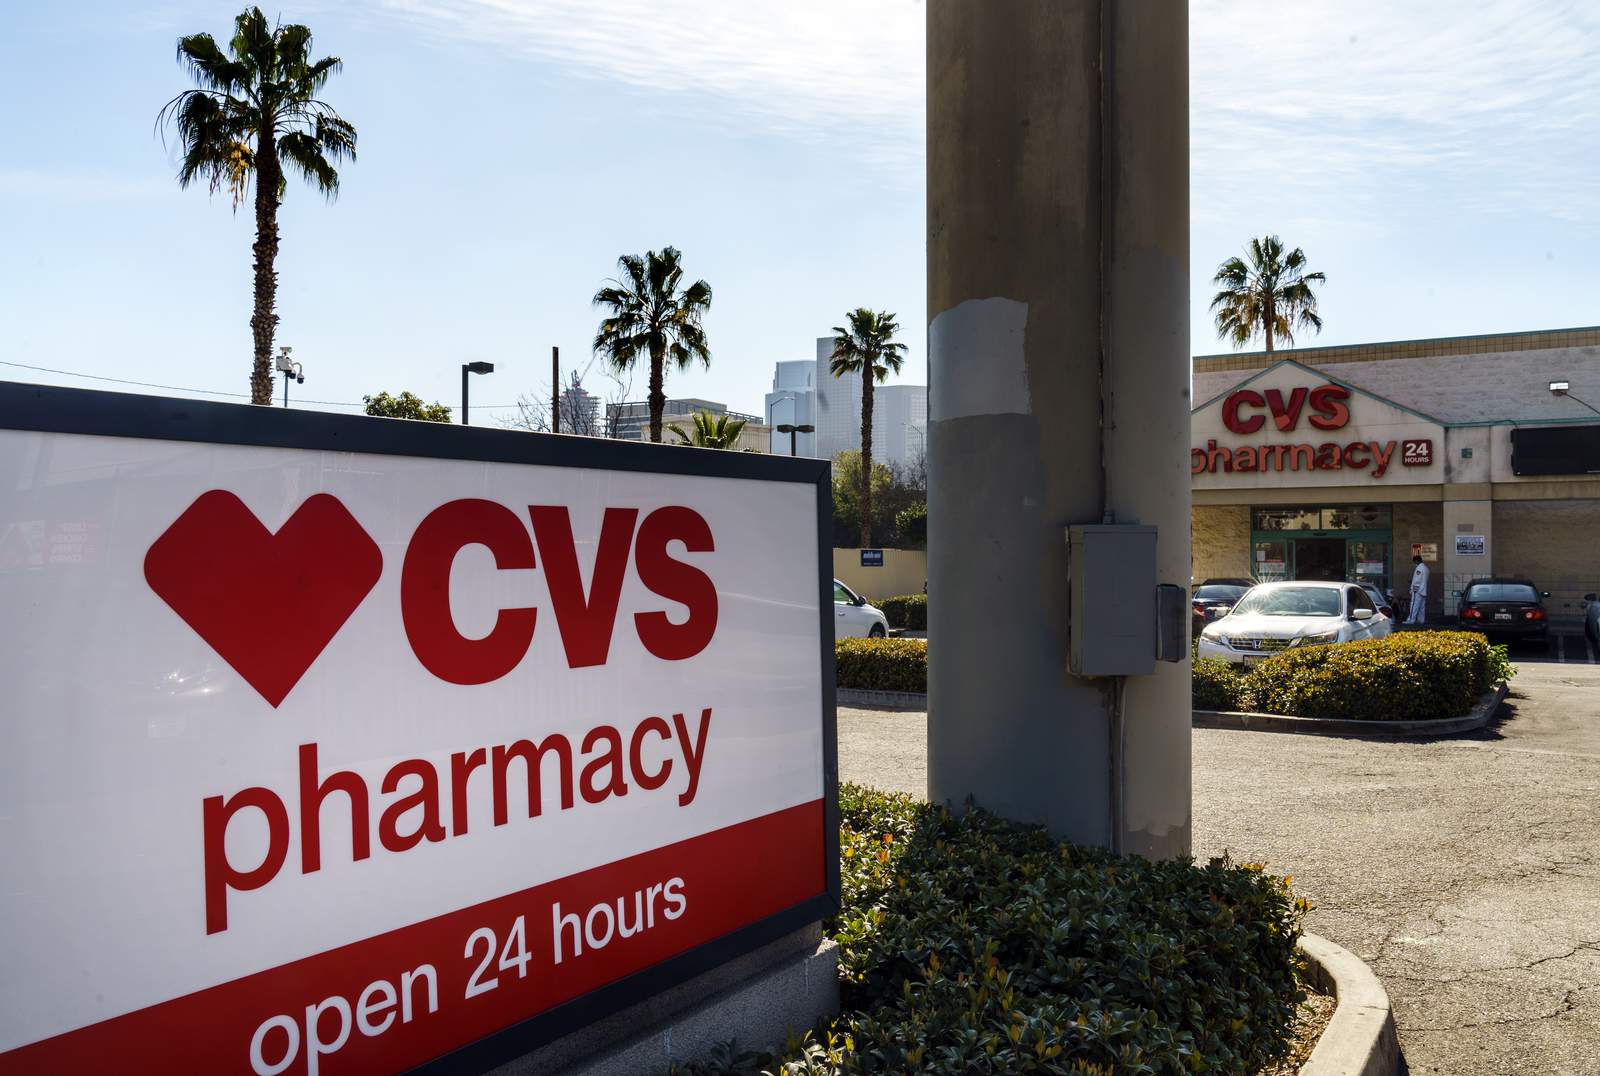 CVS posts strong Q4 numbers, but pandemic weighs on results